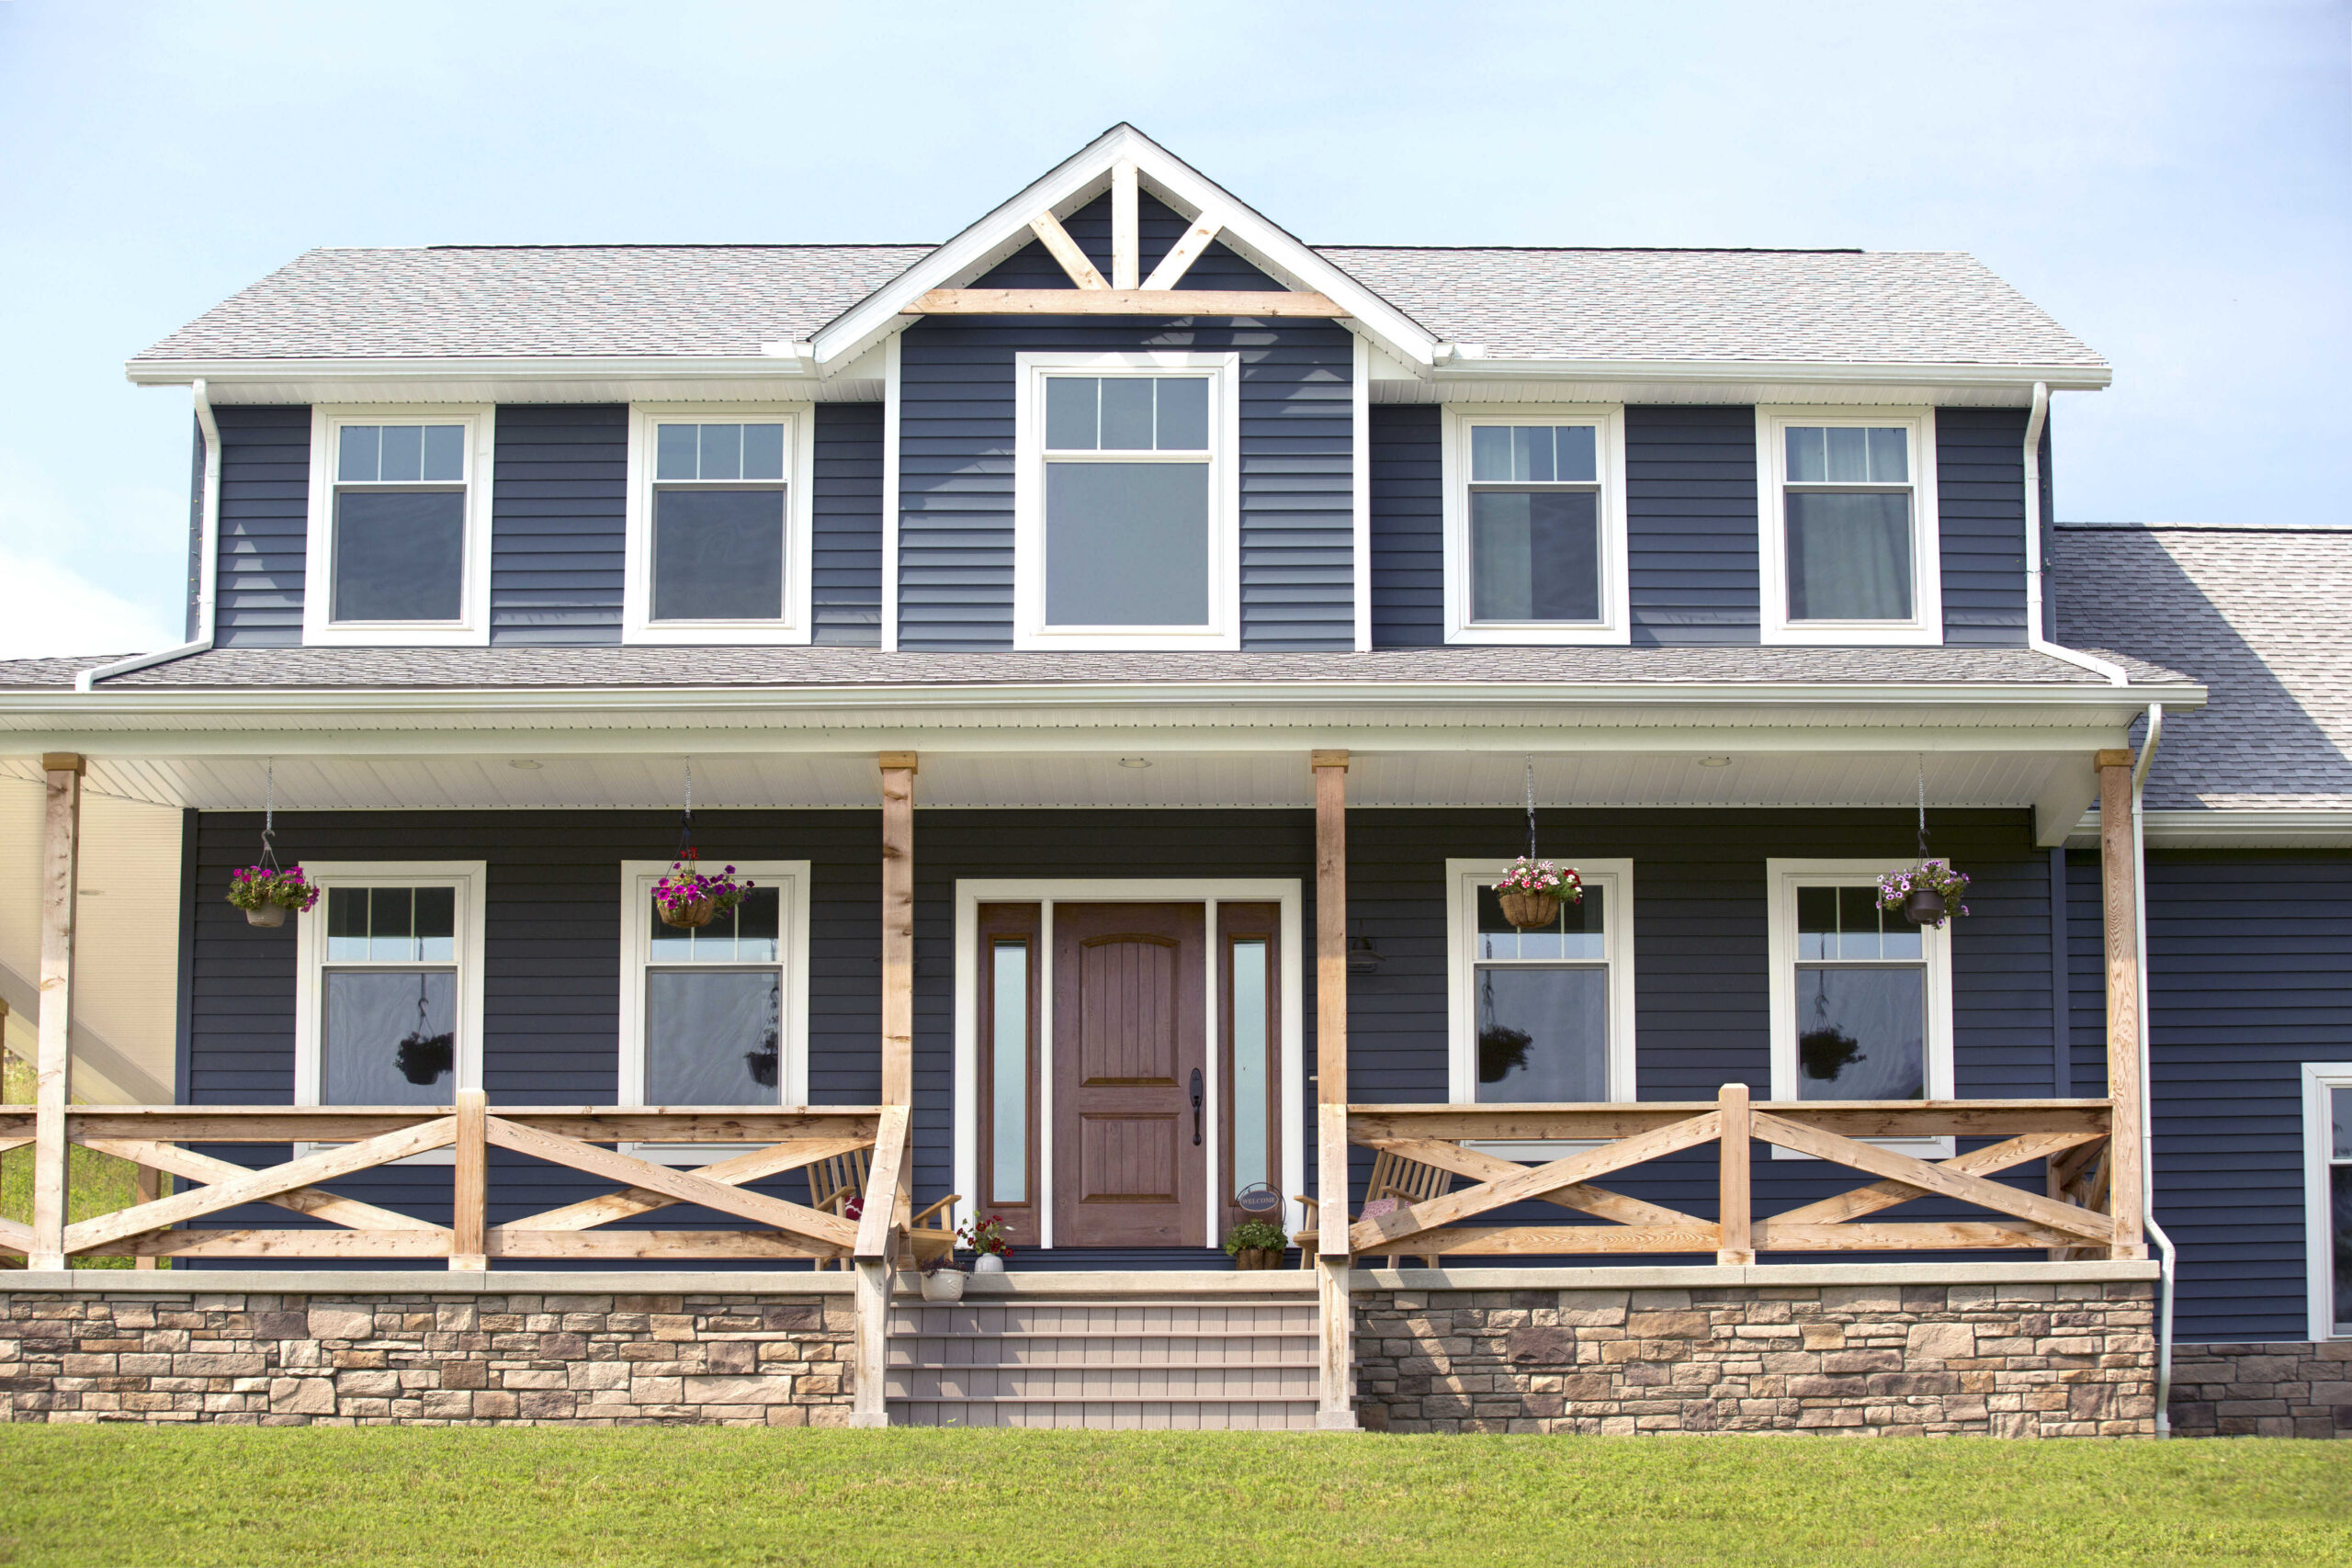 exterior of a large 2 story home with blue siding and rustic wood crossed patio railing